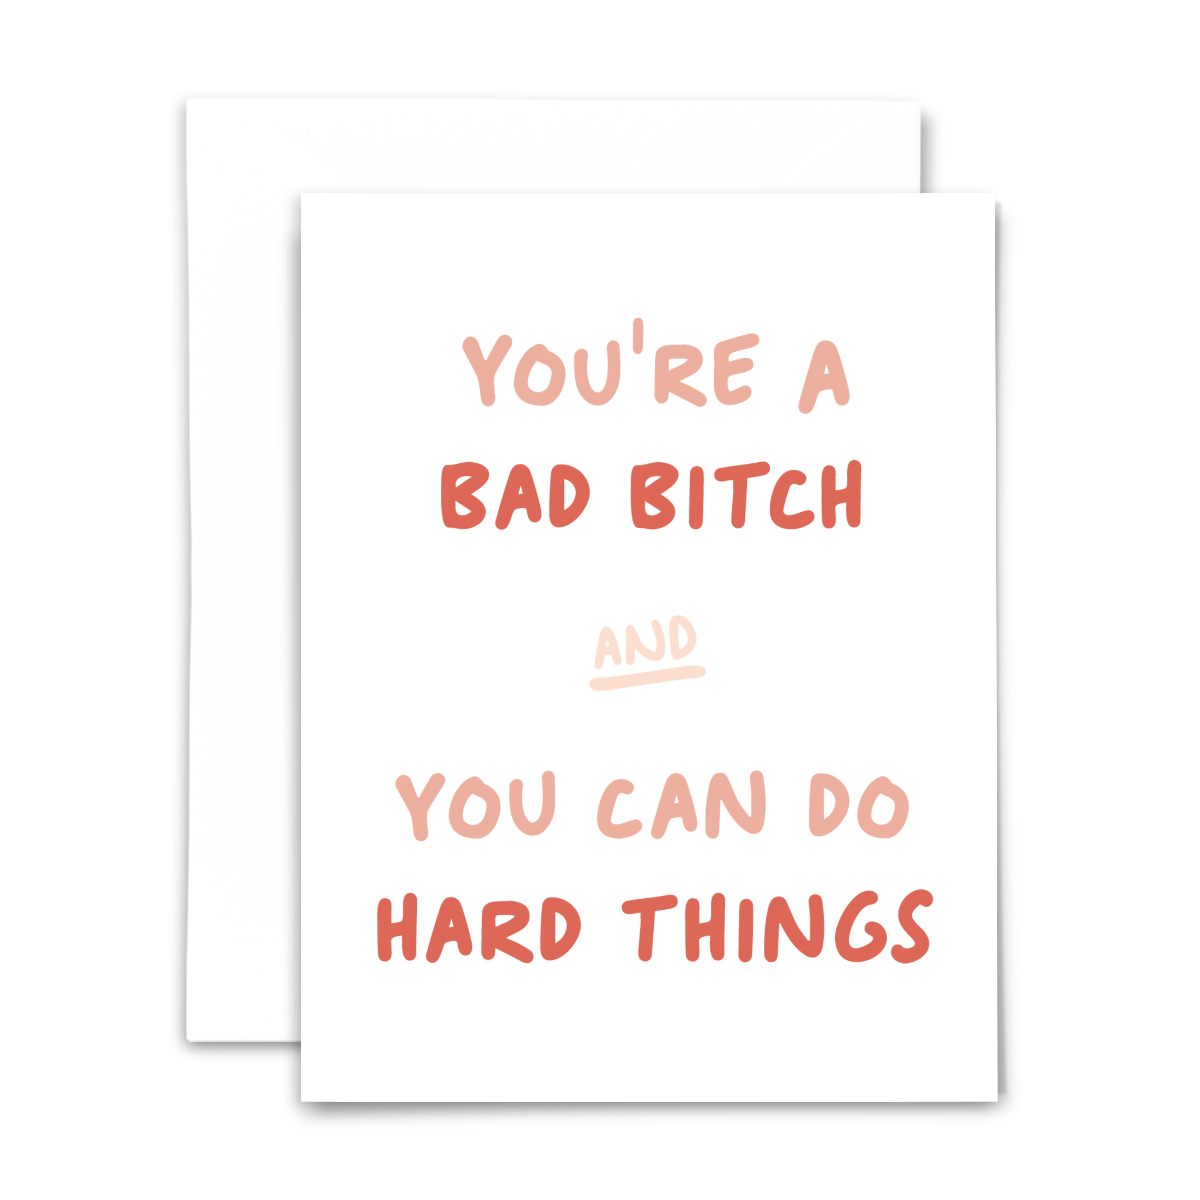 You're a bad bitch: greeting card